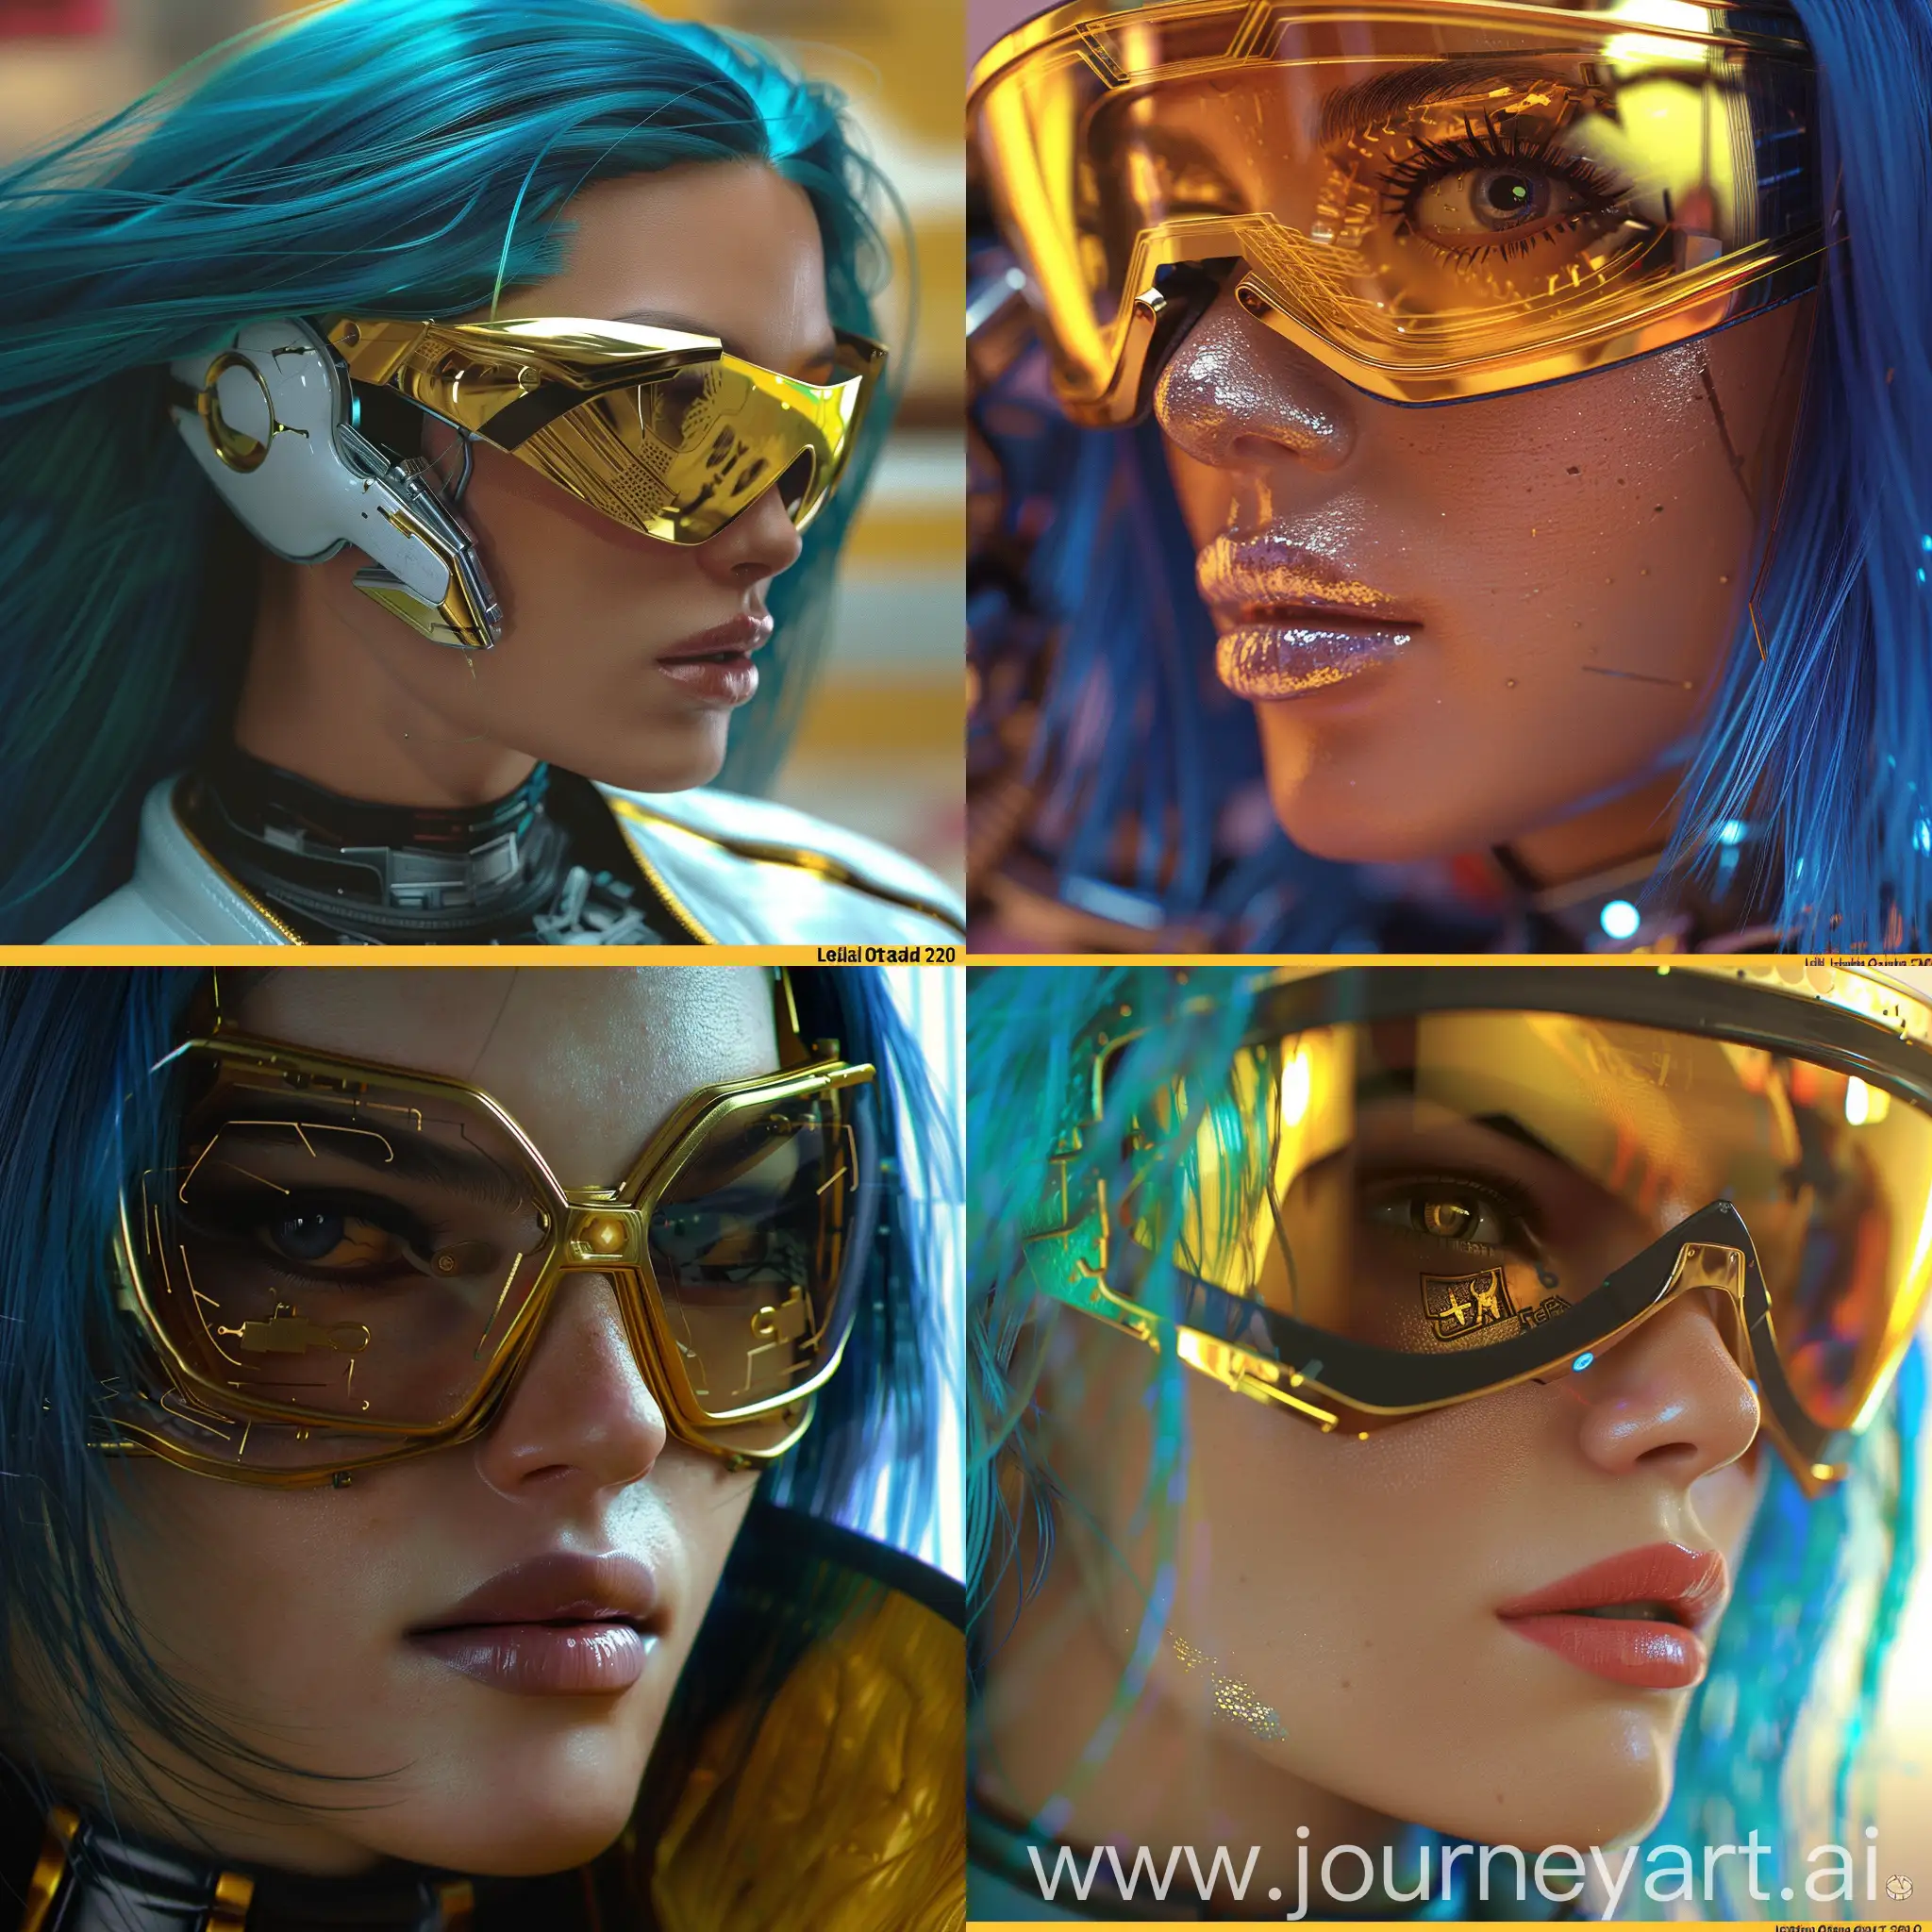 Leila Otadi,scarlet johanson,20 year old, Iranian woman , fighter , nothing on hairs,  relastic ,blue hair more margin , more and more detail,AI robot style ,in middle of fight,golden parts a close up of a person wearing sunglasses, cyberpunk 2 0 y. o model girl, cyberpunk femme fatale, cyber school girl, cyberpunk beautiful girl, cyberpunk anime girl, cyberpunk girl, synthwave image, beautiful cyberpunk woman model, as a retro futuristic heroine, retrofuturistic female android, cyberpunk women, dreamy cyberpunk girl, cyberpunk woman, cyberpunk eye wear, barbie cyborg